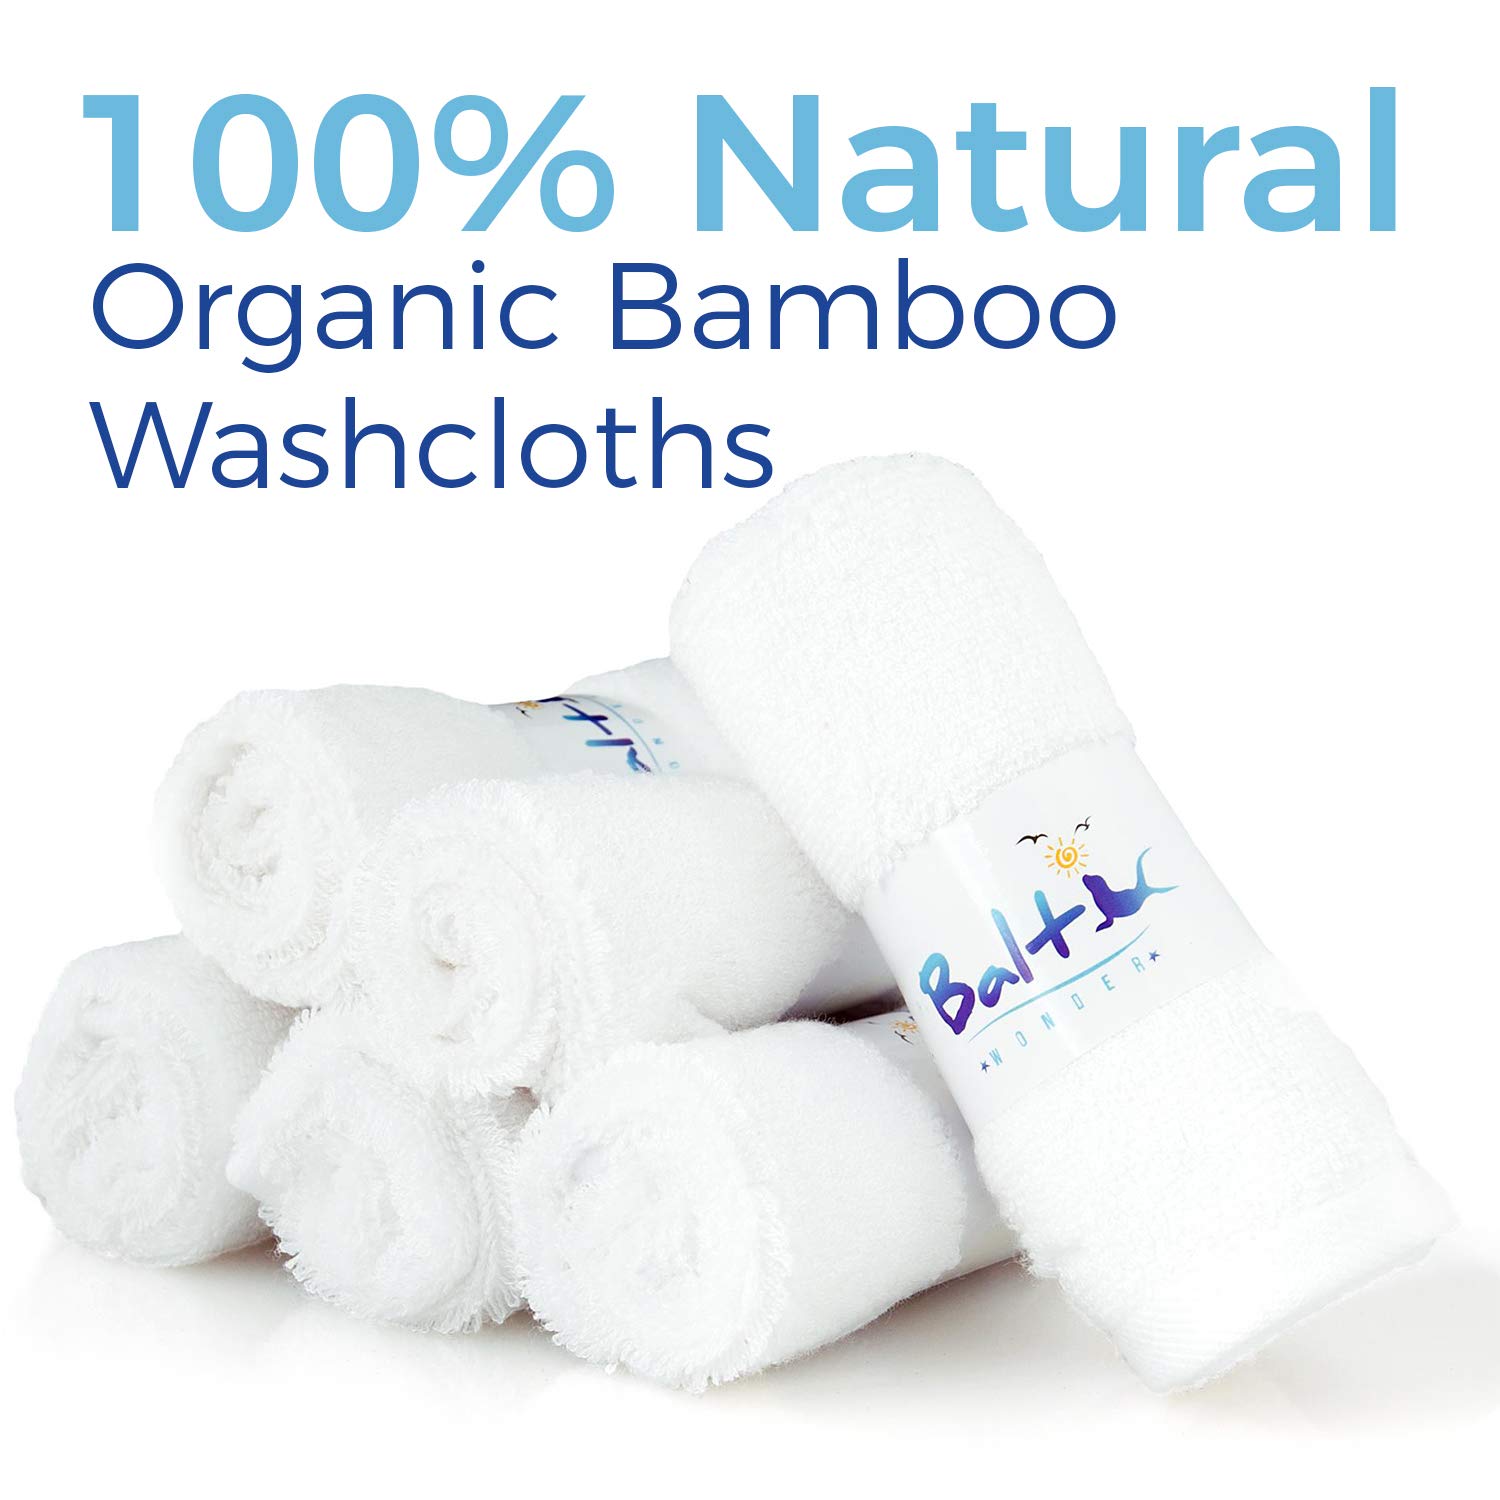 Baby Washcloths – Hypoallergenic Organic Bamboo Towel, Ultra Soft and Absorbent, Natural Reusable Wipes Perfect for Sensitive Skin and Newborn Bath